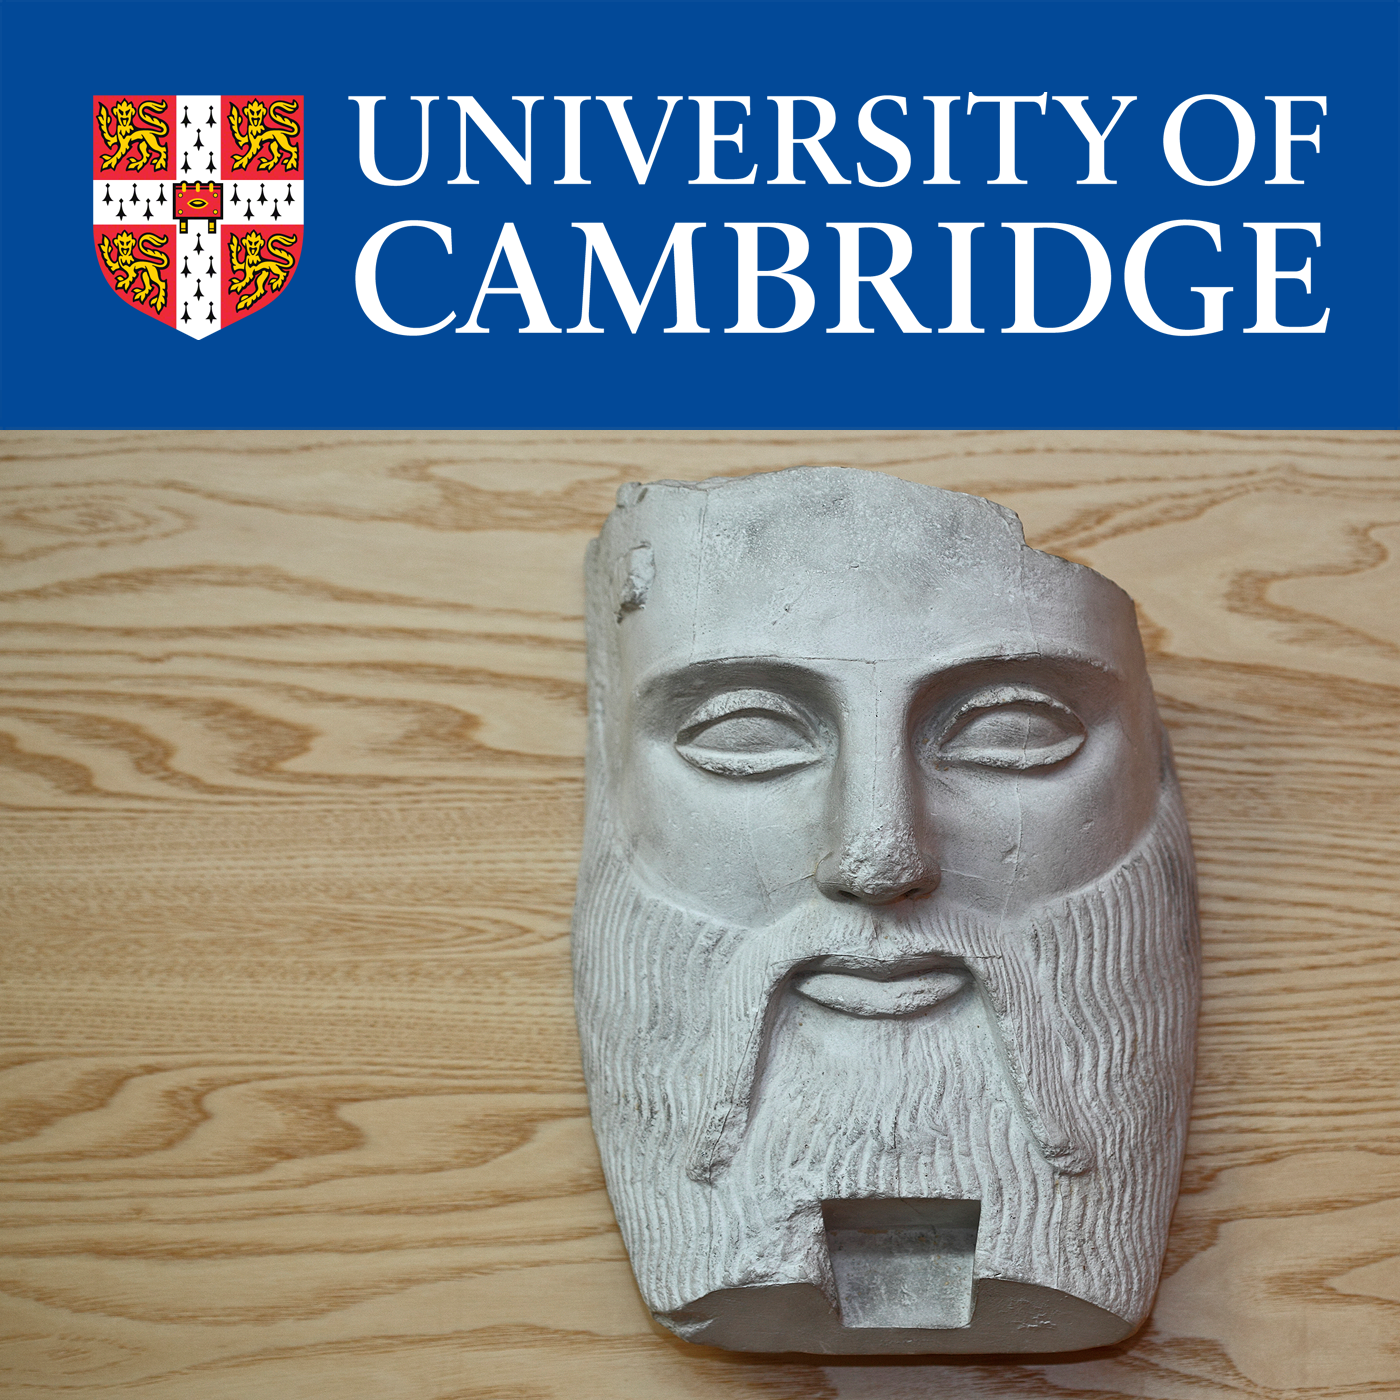 Aspects of Philosophy at Cambridge's image